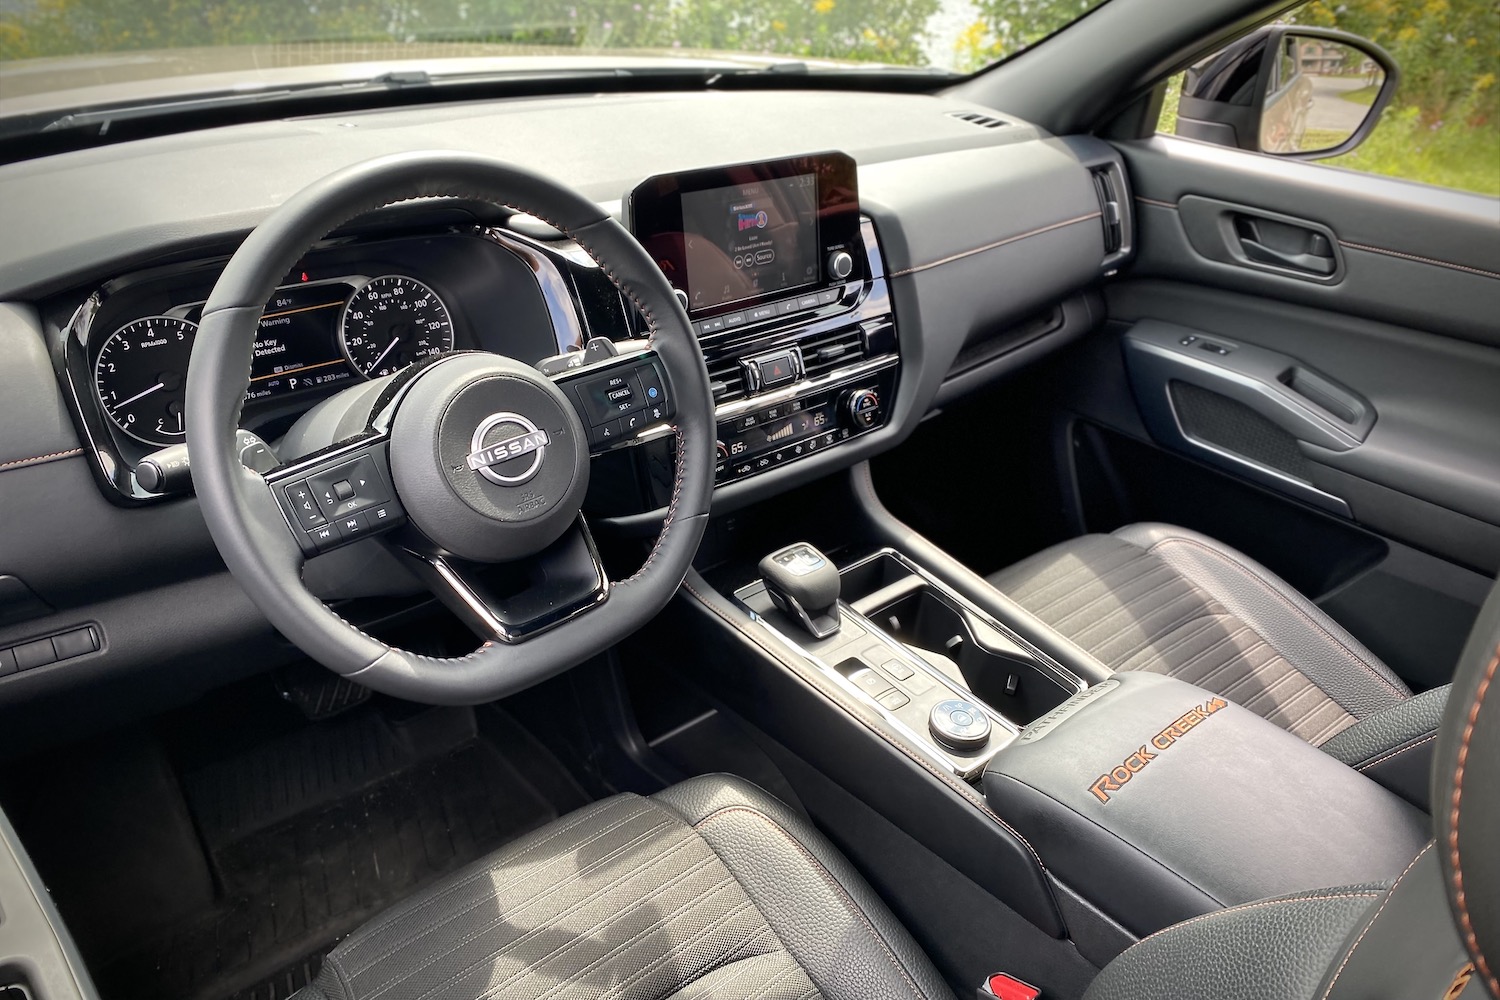 2023 Nissan Pathfinder Rock Creek dashboard and steering wheel in front of a grassy field.